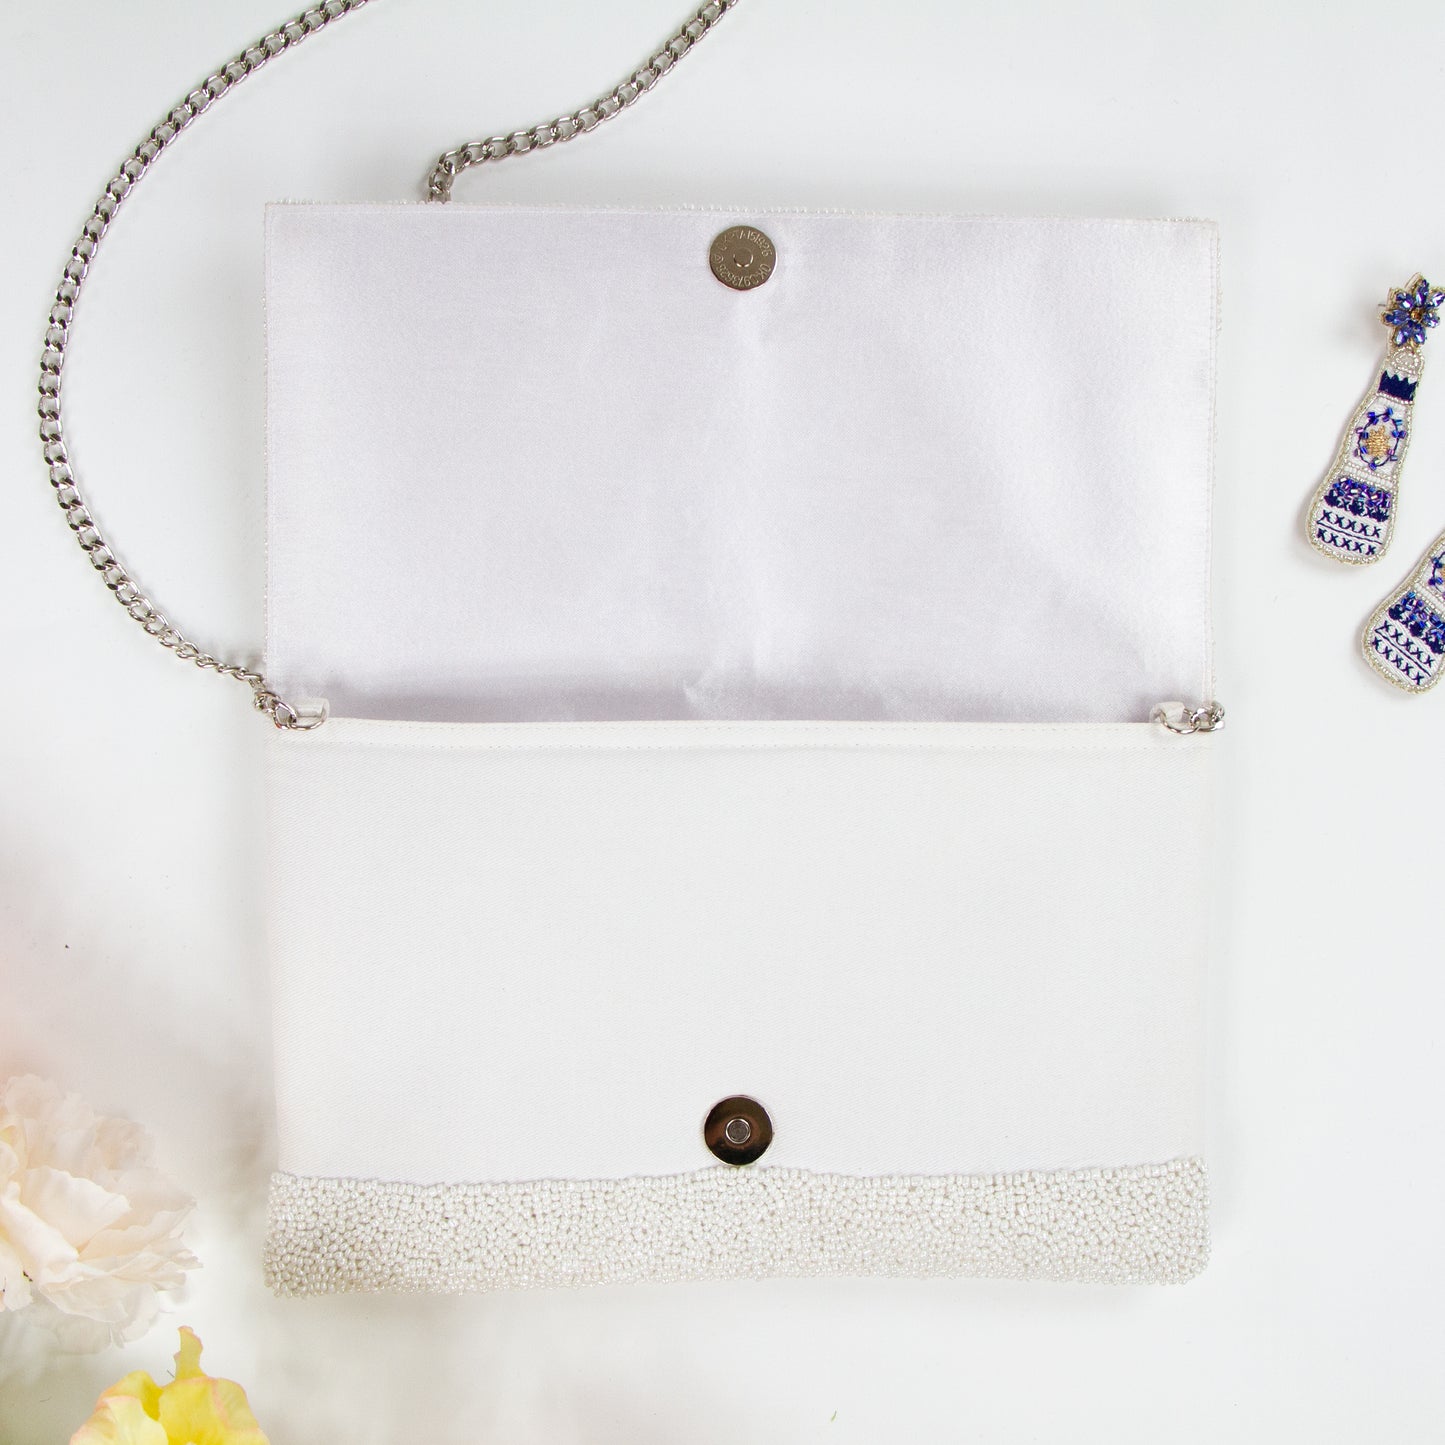 Title/bridal Clutch "Elegant white beaded bridal clutch, handmade to perfection, sized at 10.5 x 7 x 1 inches. This durable canvas bridal clutch with magnetic snap closure offers a stylish and practical solution for the wedding day, ensuring each bride has a unique accessory for her special occasion."